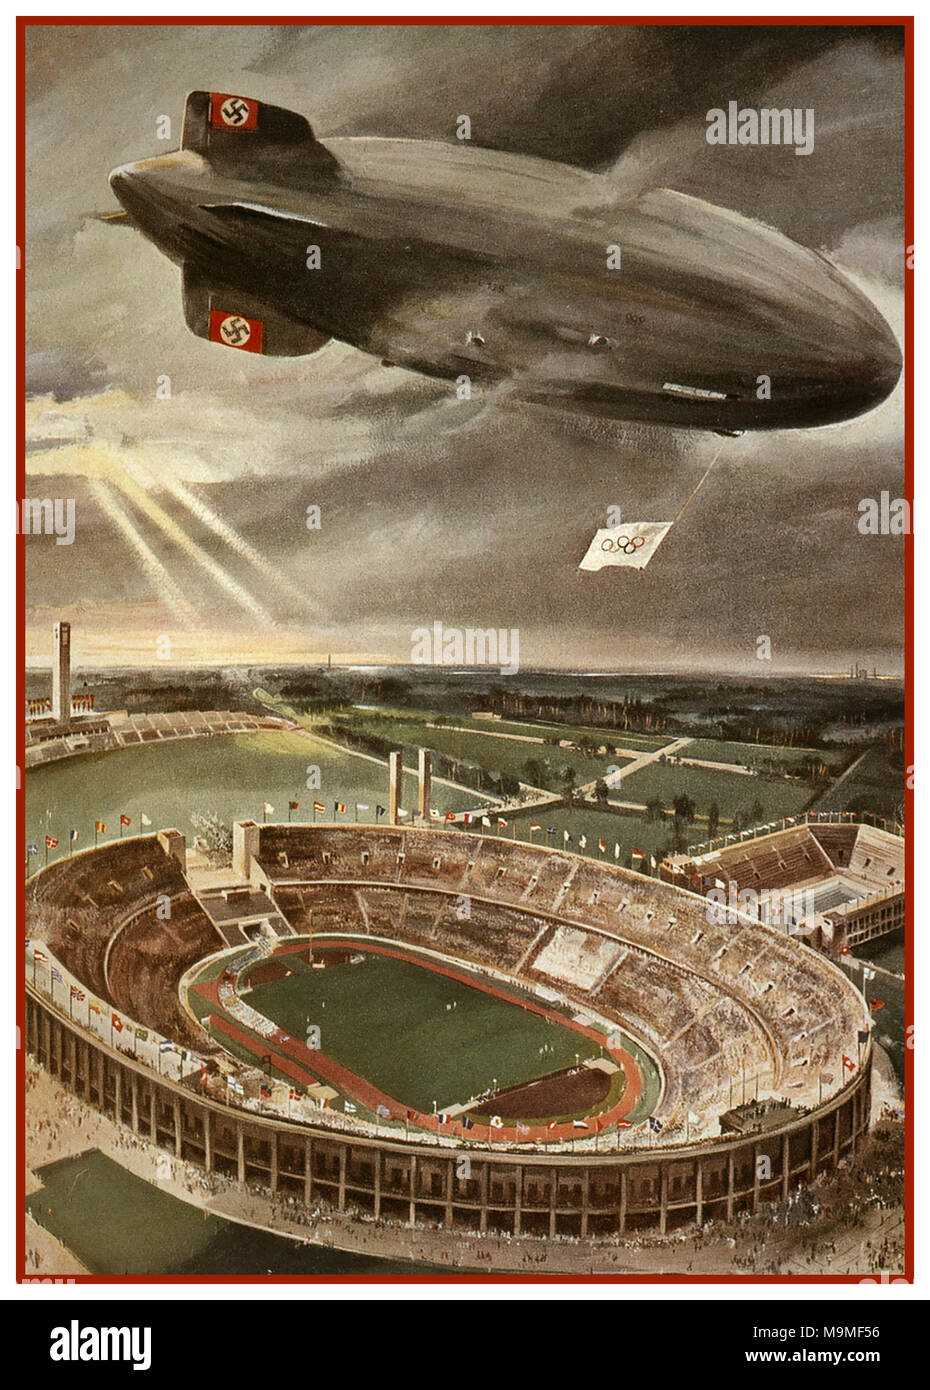 Hindenburg Zeppelin Airship 1936 Olympic Games Nazi Berlin Germany Vintage Poster illustration of Nazi Hindenburg Zeppelin Airship flying Olympic Flag along with Swastika Tail Fins over the Berlin Olympic Games Stadium during the opening ceremony of the Nazi Germany Olympic Games. Stock Photo